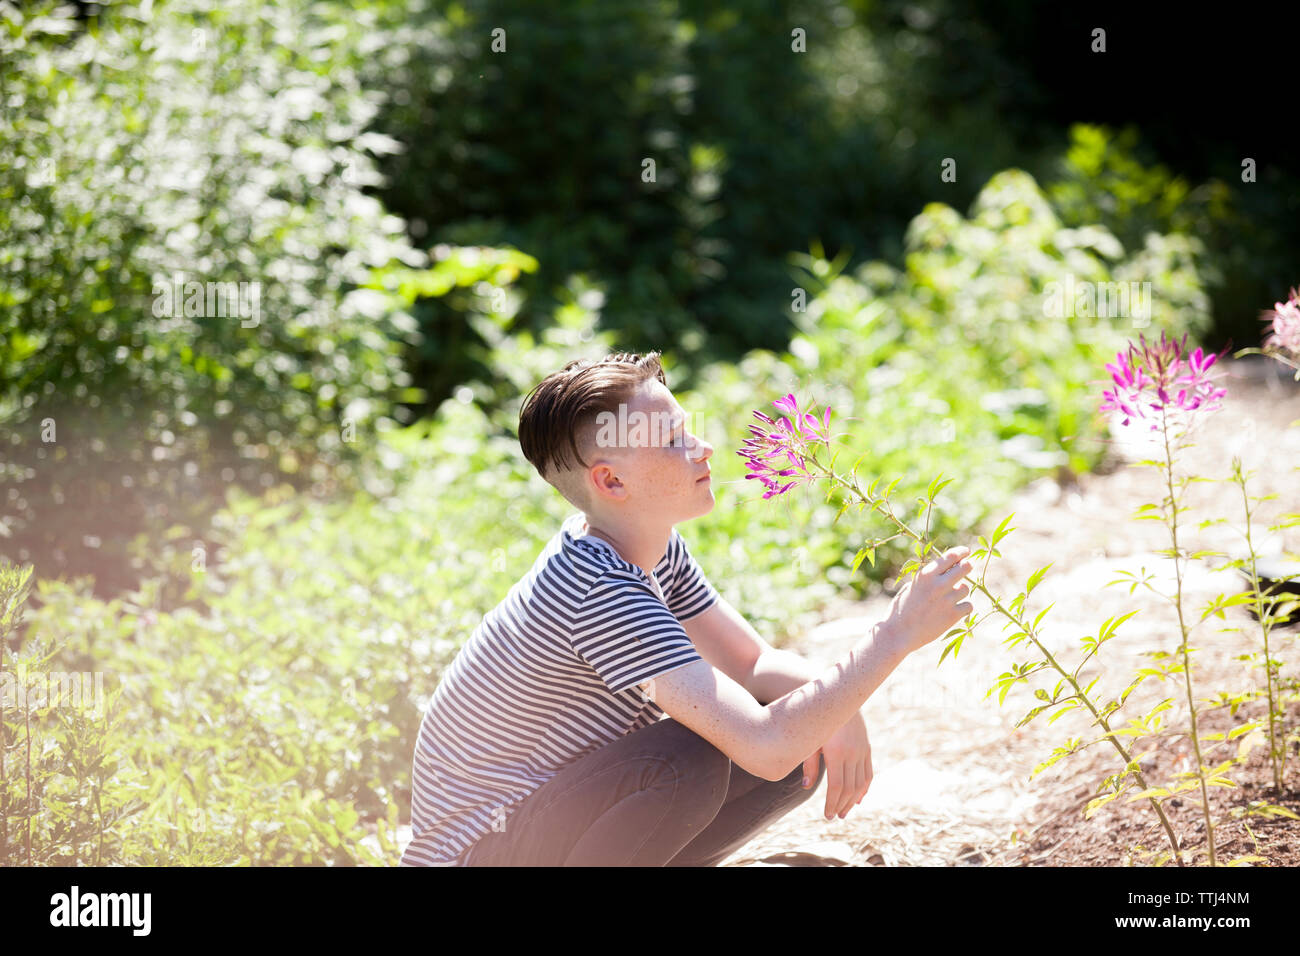 Side view of teenage boy smelling flowers while crouching on field Stock Photo